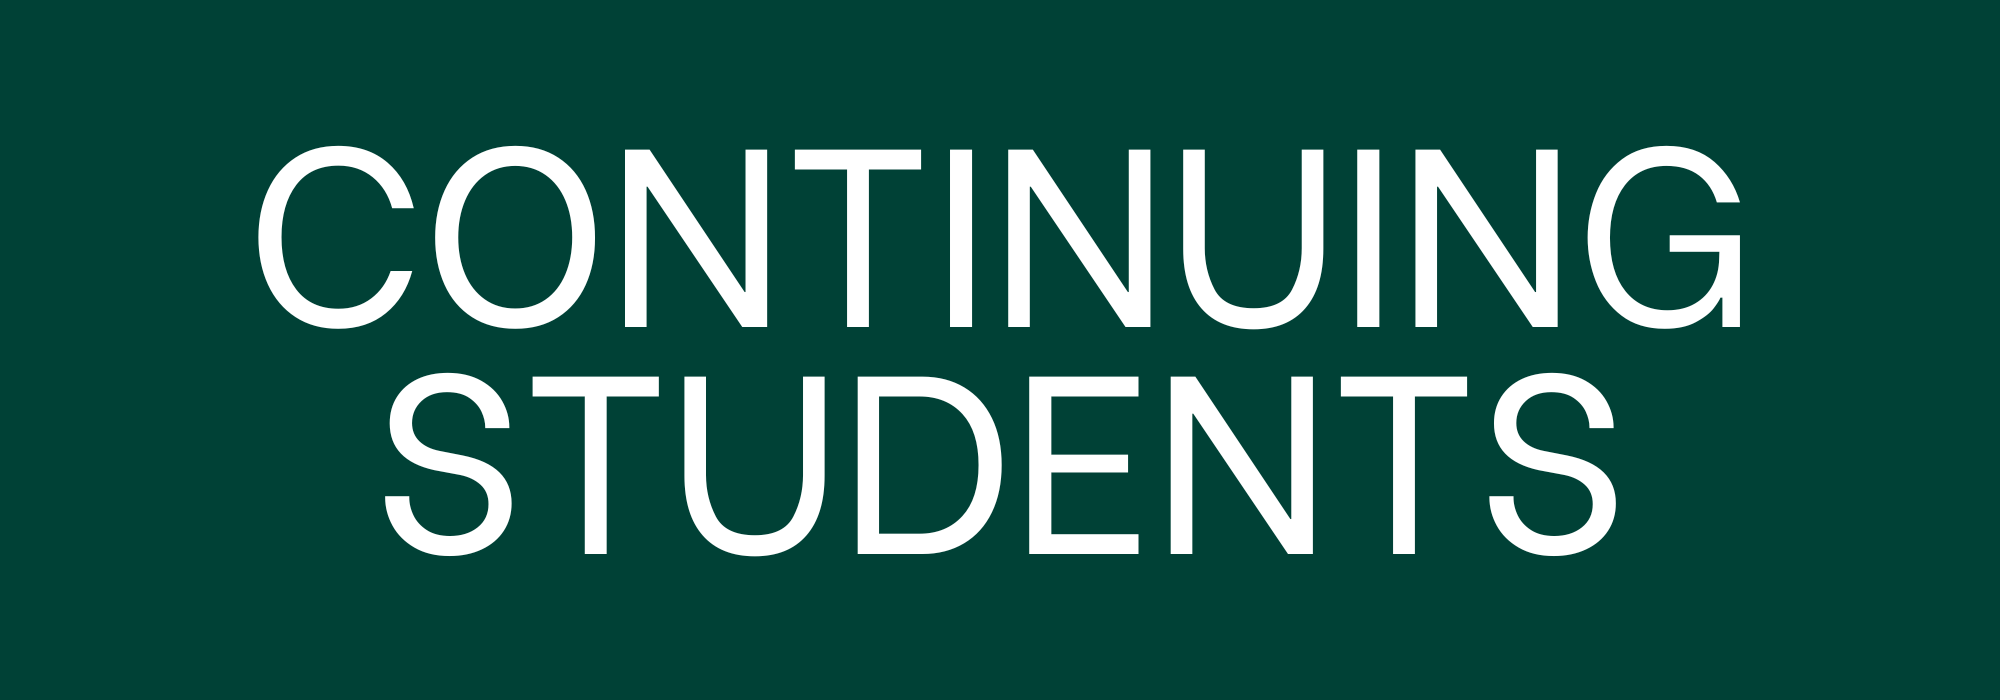 continuing students scholarship web page